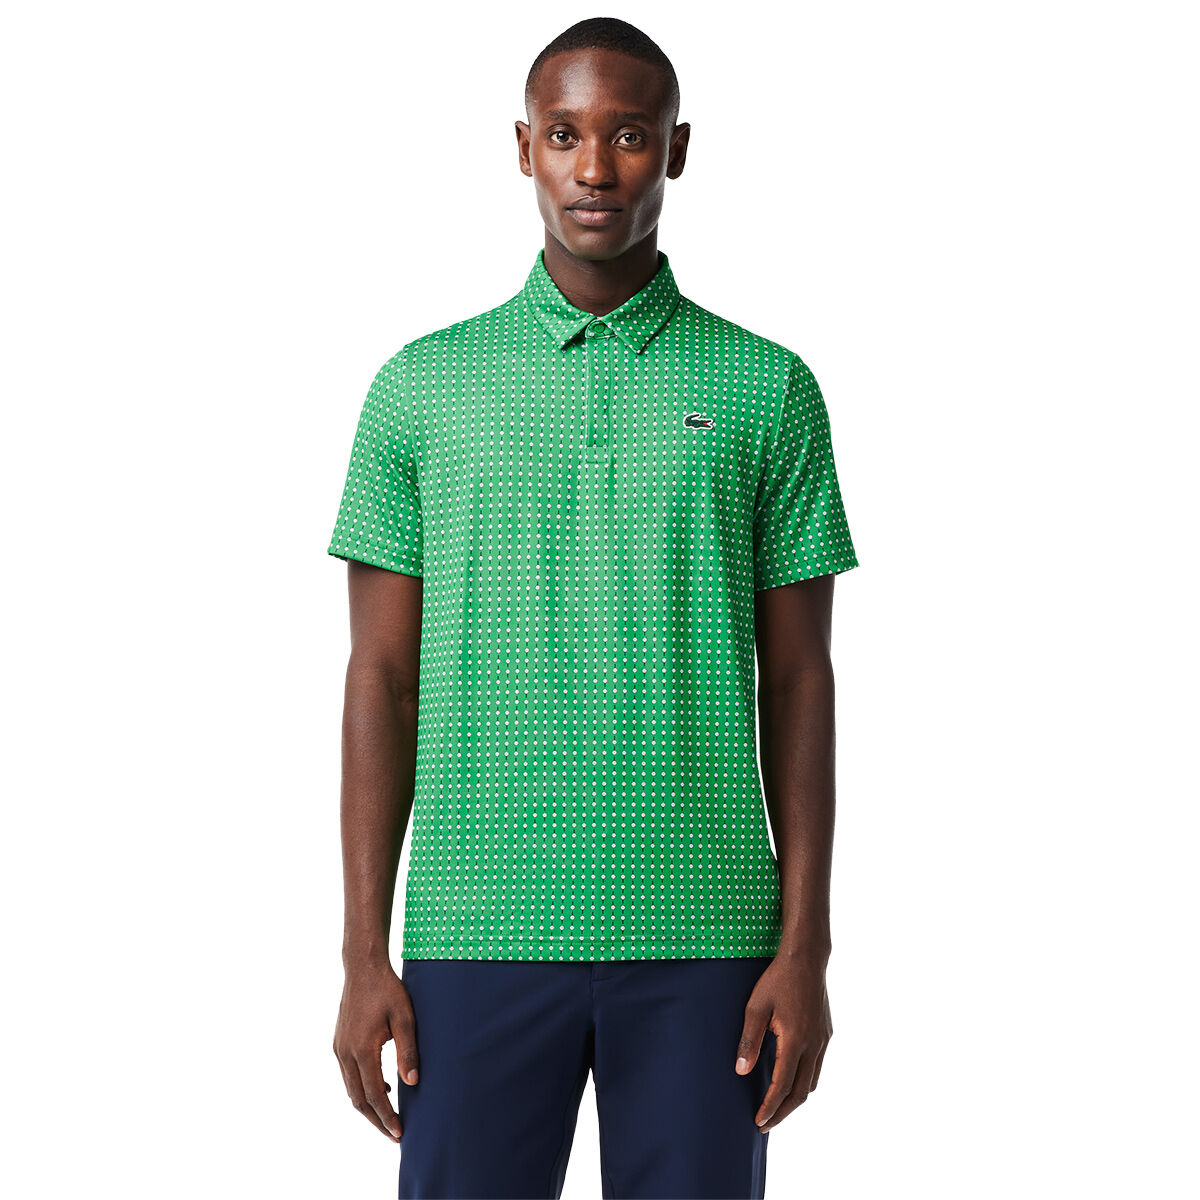 Lacoste Men's All-Over Print Golf Polo Shirt, Mens, Green, Small | American Golf von Lacoste